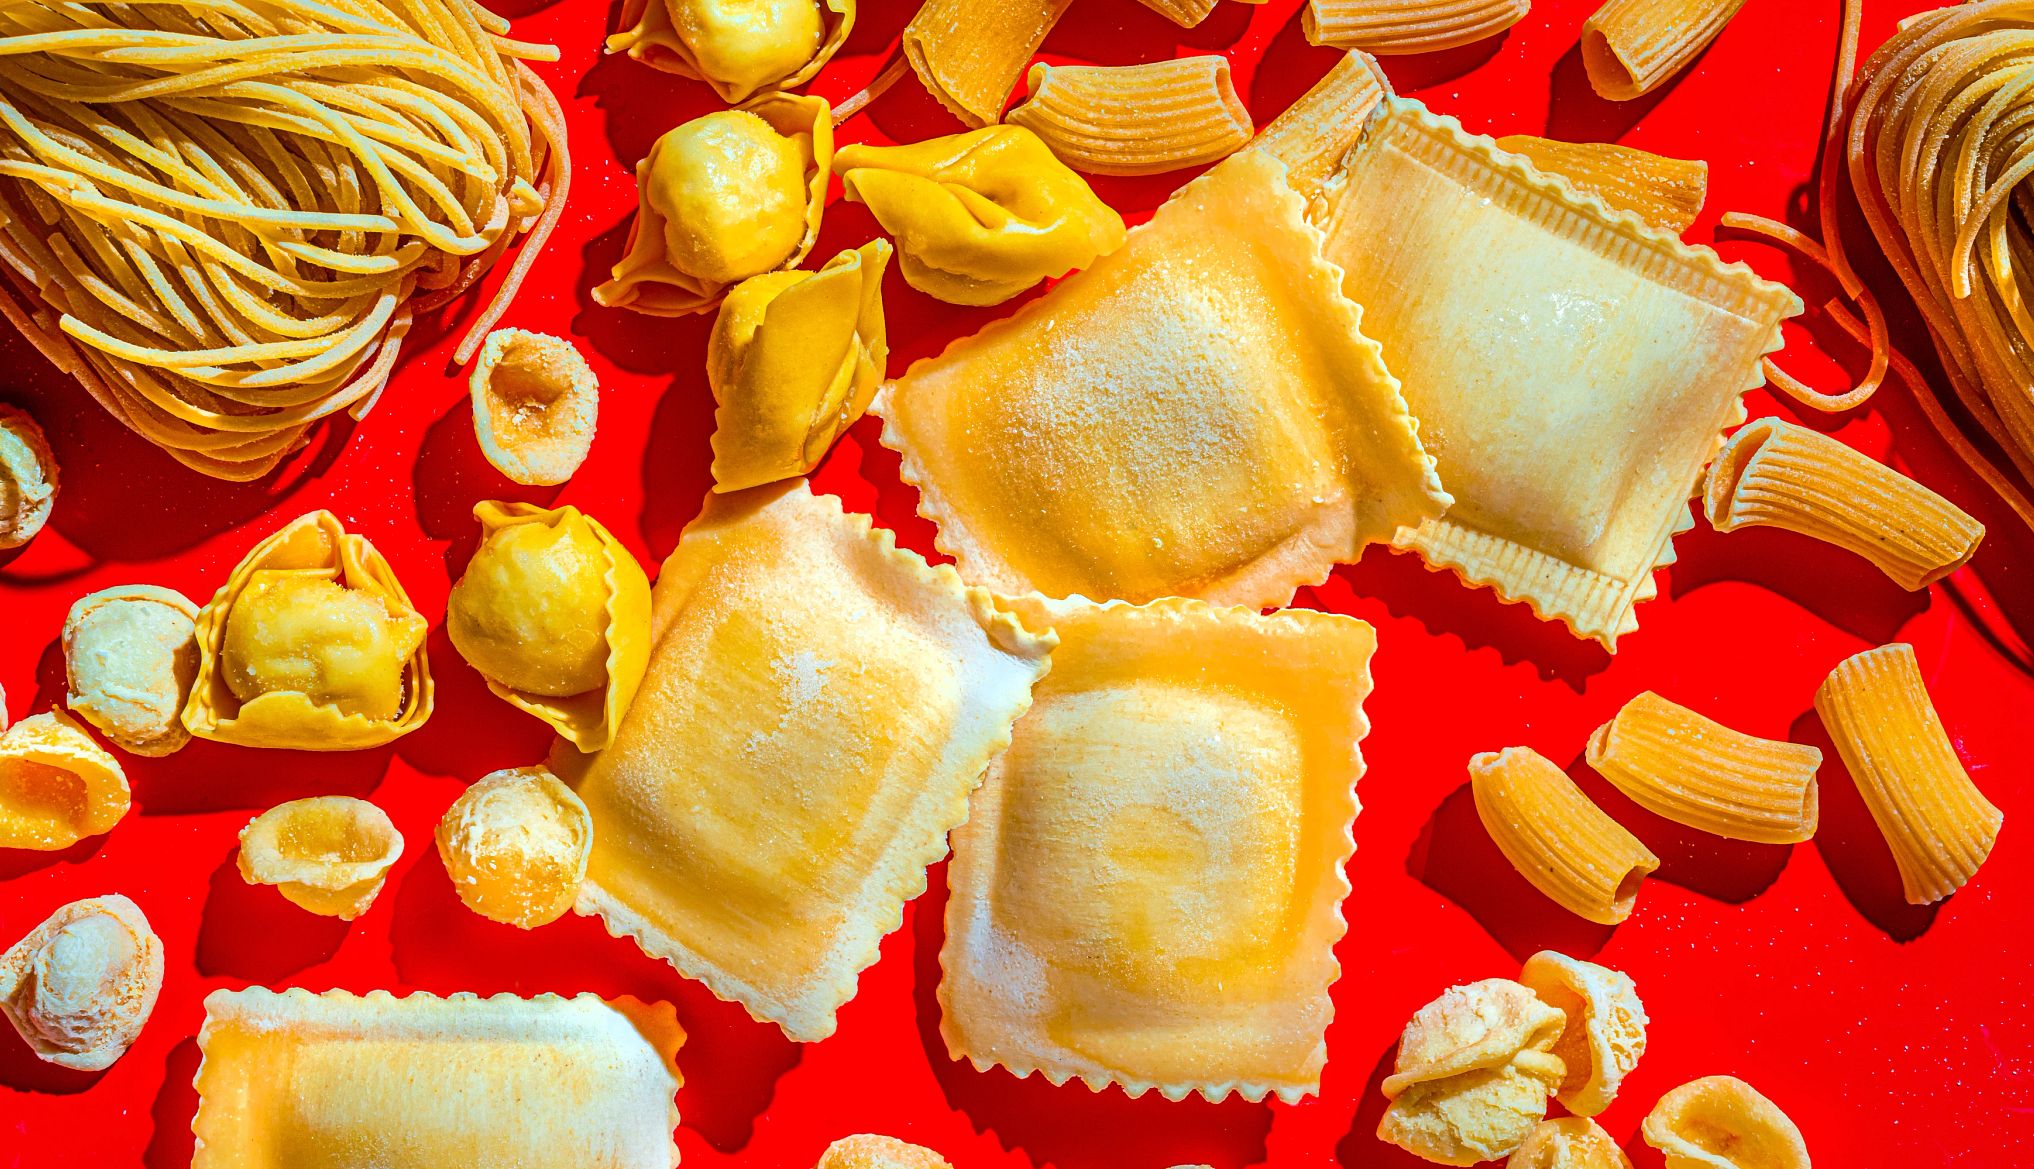 assorted pasta on a red background